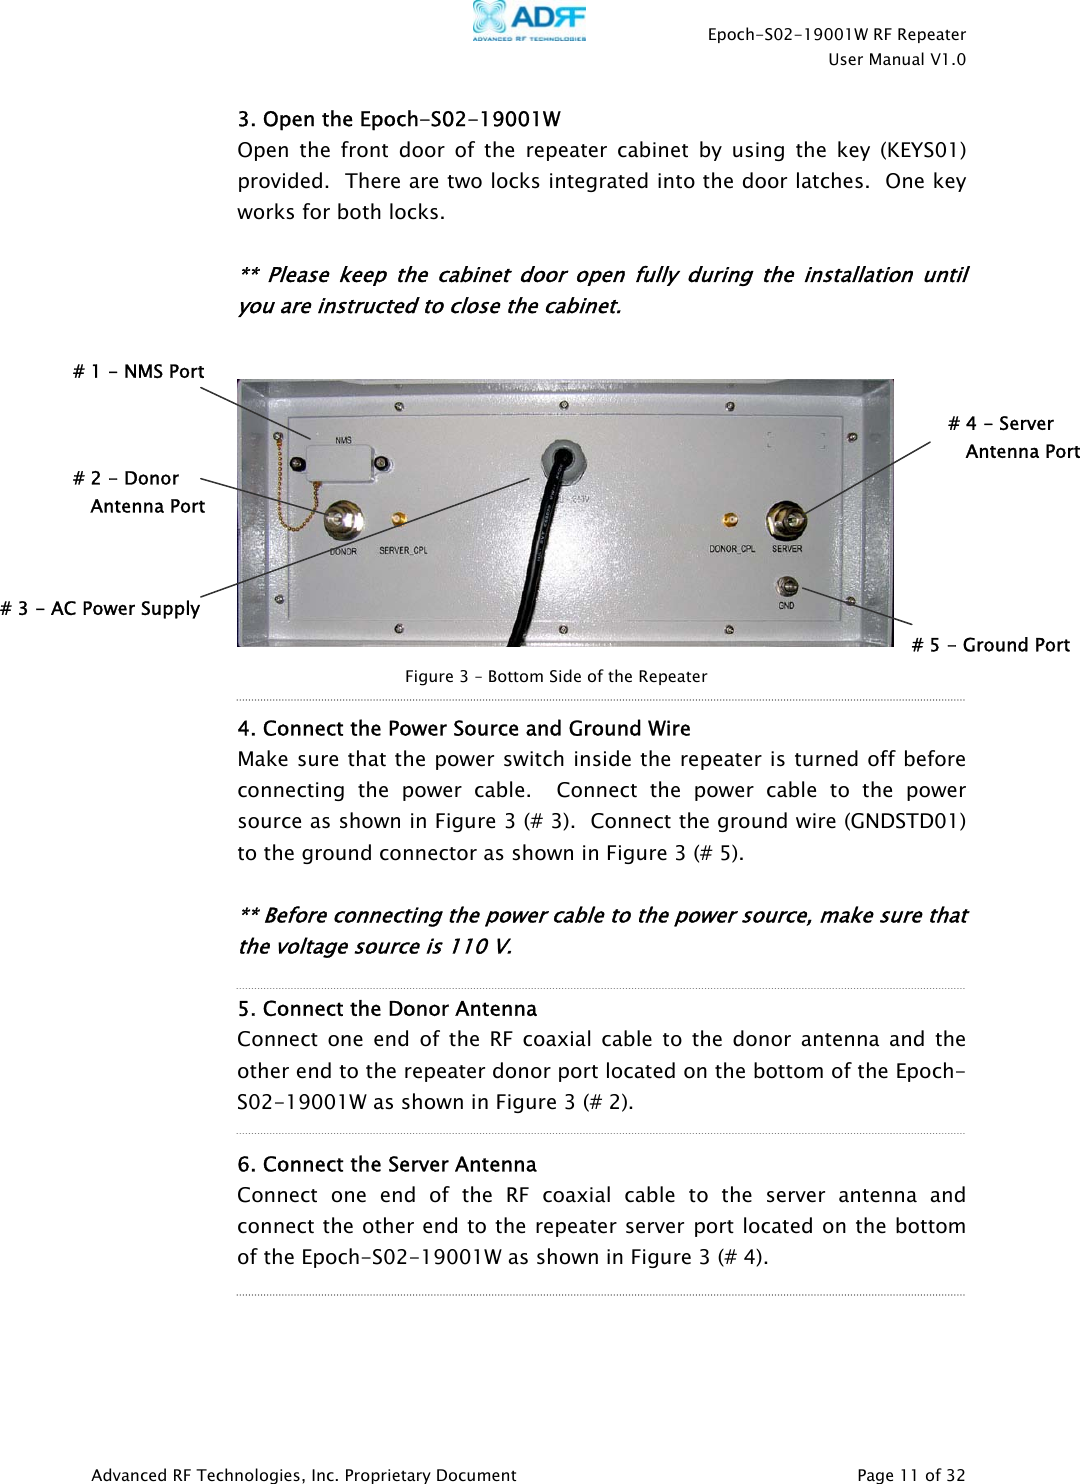    Epoch-S02-19001W RF Repeater  User Manual V1.0  Advanced RF Technologies, Inc. Proprietary Document   Page 11 of 32  3. Open the Epoch-S02-19001W Open the front door of the repeater cabinet by using the key (KEYS01) provided.  There are two locks integrated into the door latches.  One key works for both locks.  ** Please keep the cabinet door open fully during the installation until you are instructed to close the cabinet.        4. Connect the Power Source and Ground Wire Make sure that the power switch inside the repeater is turned off before connecting the power cable.  Connect the power cable to the power source as shown in Figure 3 (# 3).  Connect the ground wire (GNDSTD01) to the ground connector as shown in Figure 3 (# 5).    ** Before connecting the power cable to the power source, make sure that the voltage source is 110 V.       5. Connect the Donor Antenna Connect one end of the RF coaxial cable to the donor antenna and the other end to the repeater donor port located on the bottom of the Epoch-S02-19001W as shown in Figure 3 (# 2).    6. Connect the Server Antenna Connect one end of the RF coaxial cable to the server antenna and connect the other end to the repeater server port located on the bottom of the Epoch-S02-19001W as shown in Figure 3 (# 4).      Figure 3 – Bottom Side of the Repeater # 1 - NMS Port # 2 - Donor     Antenna Port # 4 - Server     Antenna Port# 5 - Ground Port# 3 - AC Power Supply 